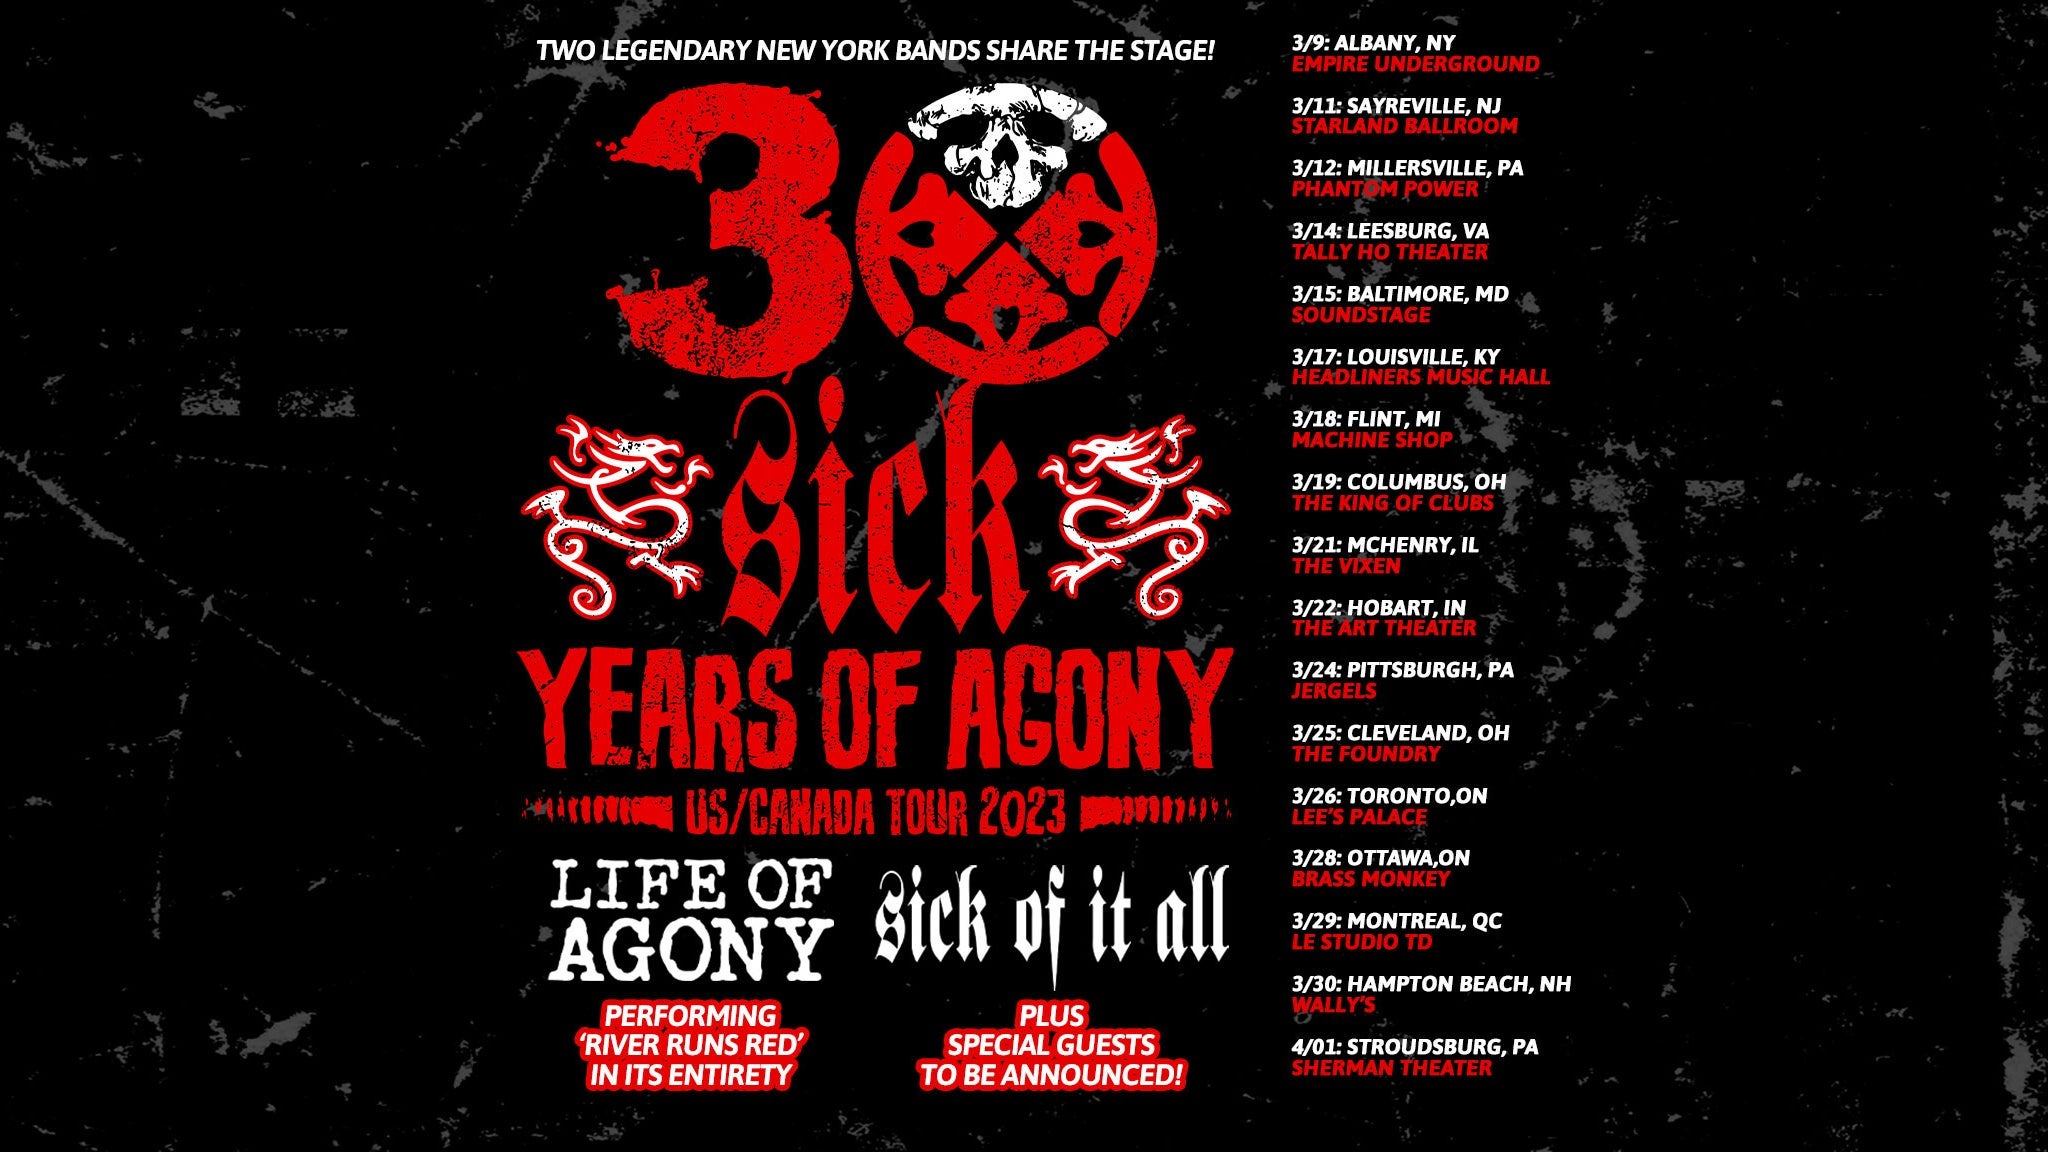 Life of Agony & Sick of it all at The Vixen